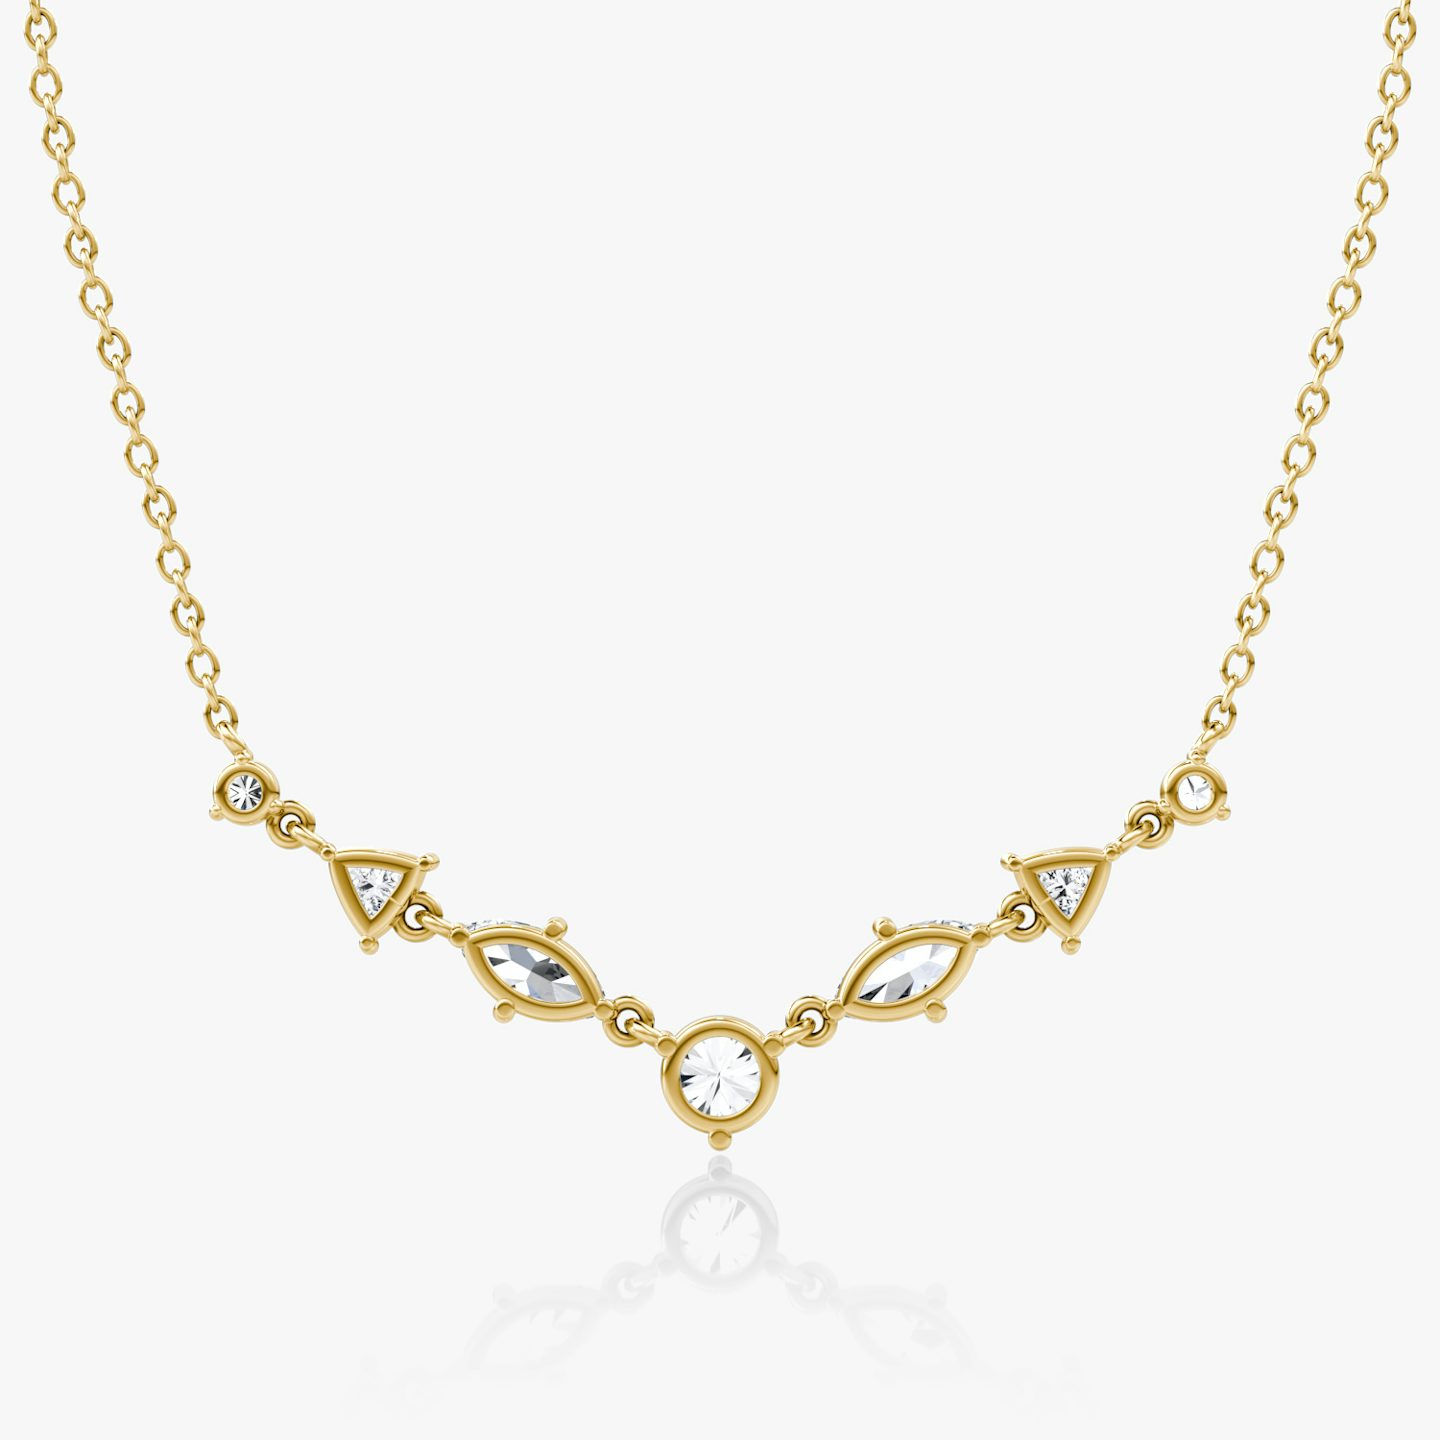 undefined | 14k | Yellow Gold | diamondtype: round-brilliant+marquise+trillion | chainLength: 16-18